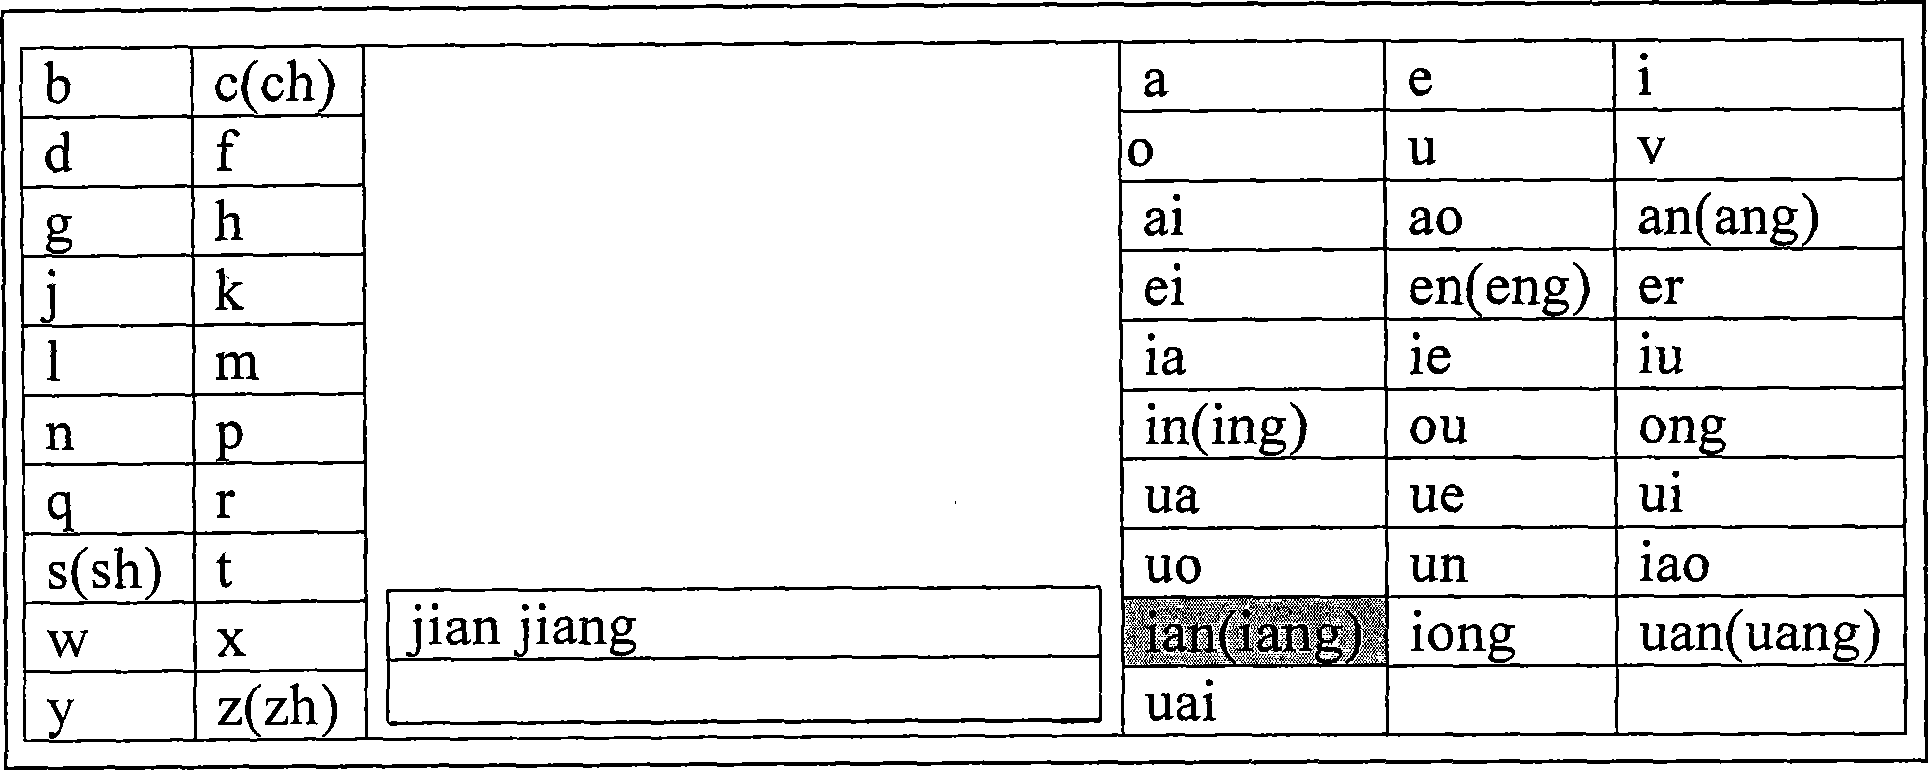 Keyboard and Chinese character input method thereof